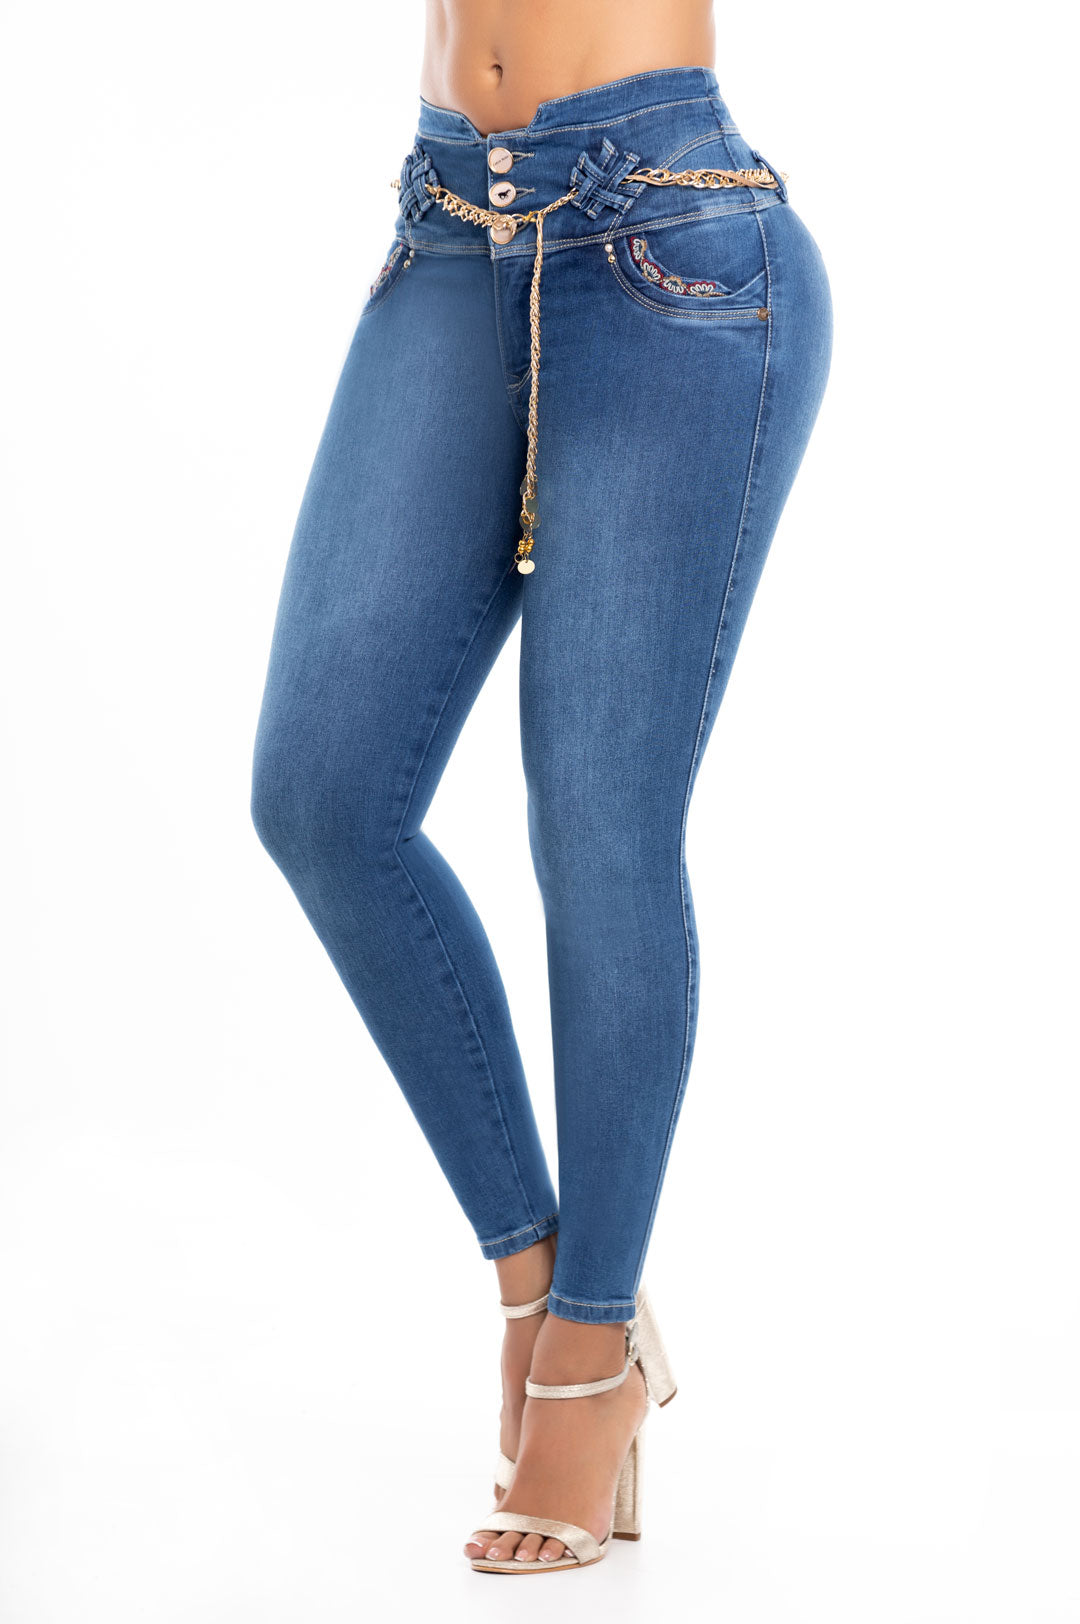 Comprar Jeans Colombianos Push Up online